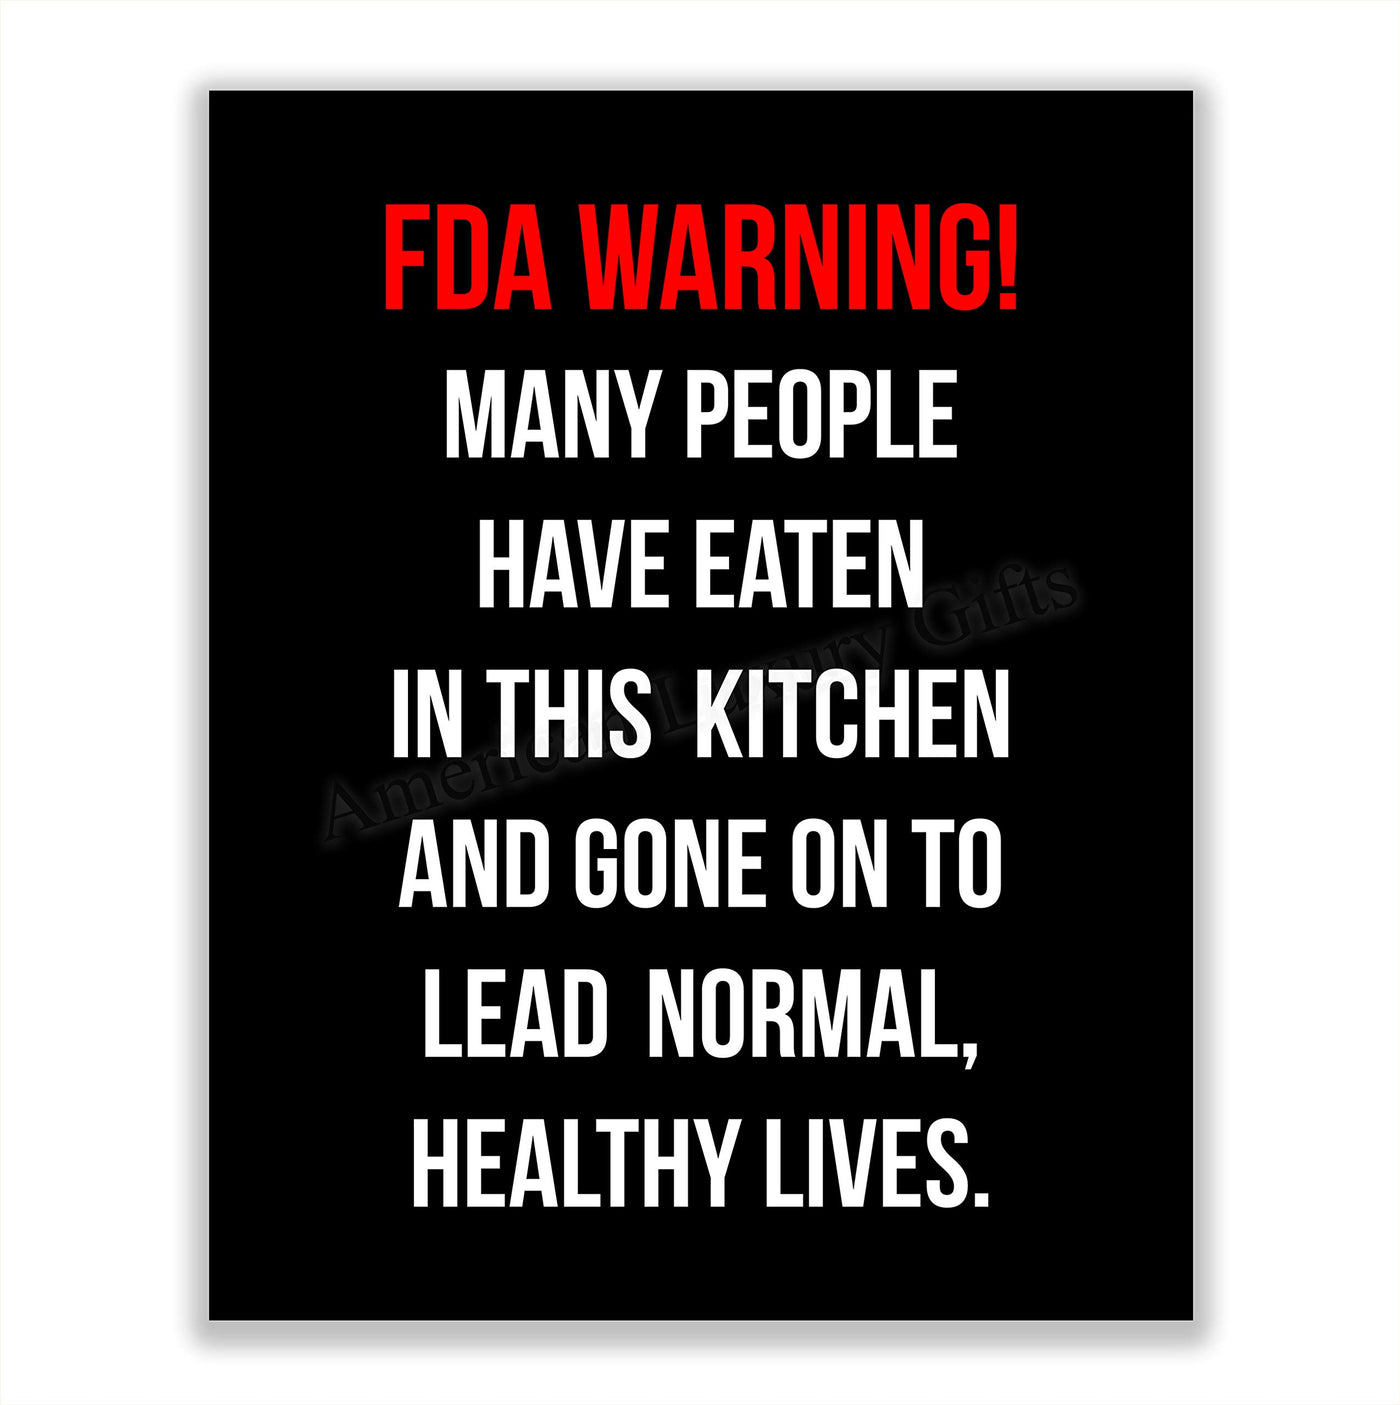 FDA WARNING-Many People Have Eaten in This Kitchen Funny Wall Sign- 8 x 10" Wall Art Print-Ready to Frame. Humorous Home-Office-Bar-Man Cave D?cor. Perfect Kitchen Sign! Great Novelty Gift for All!